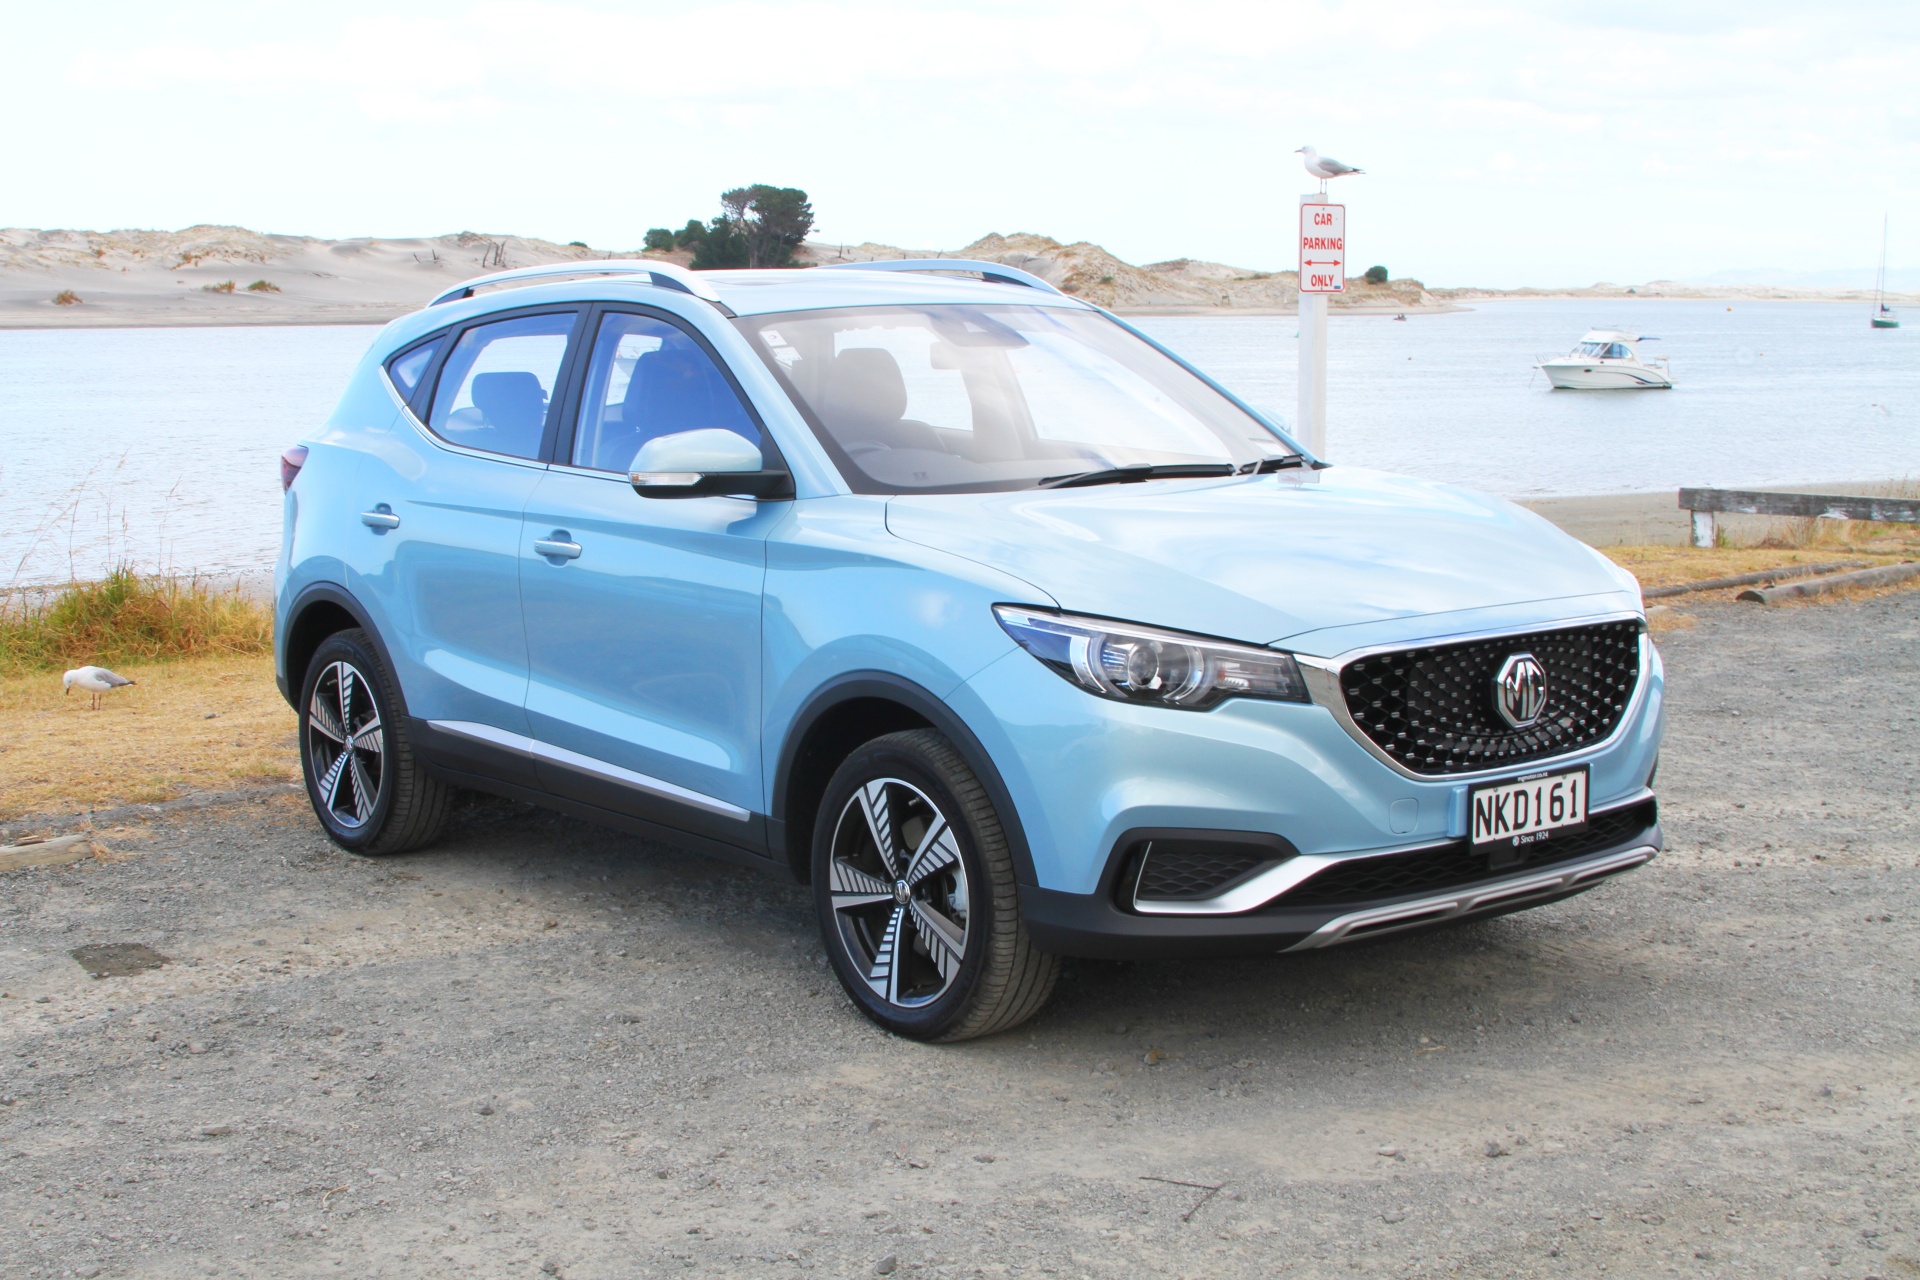 MG ZS EV electric vehicle in New Zealand